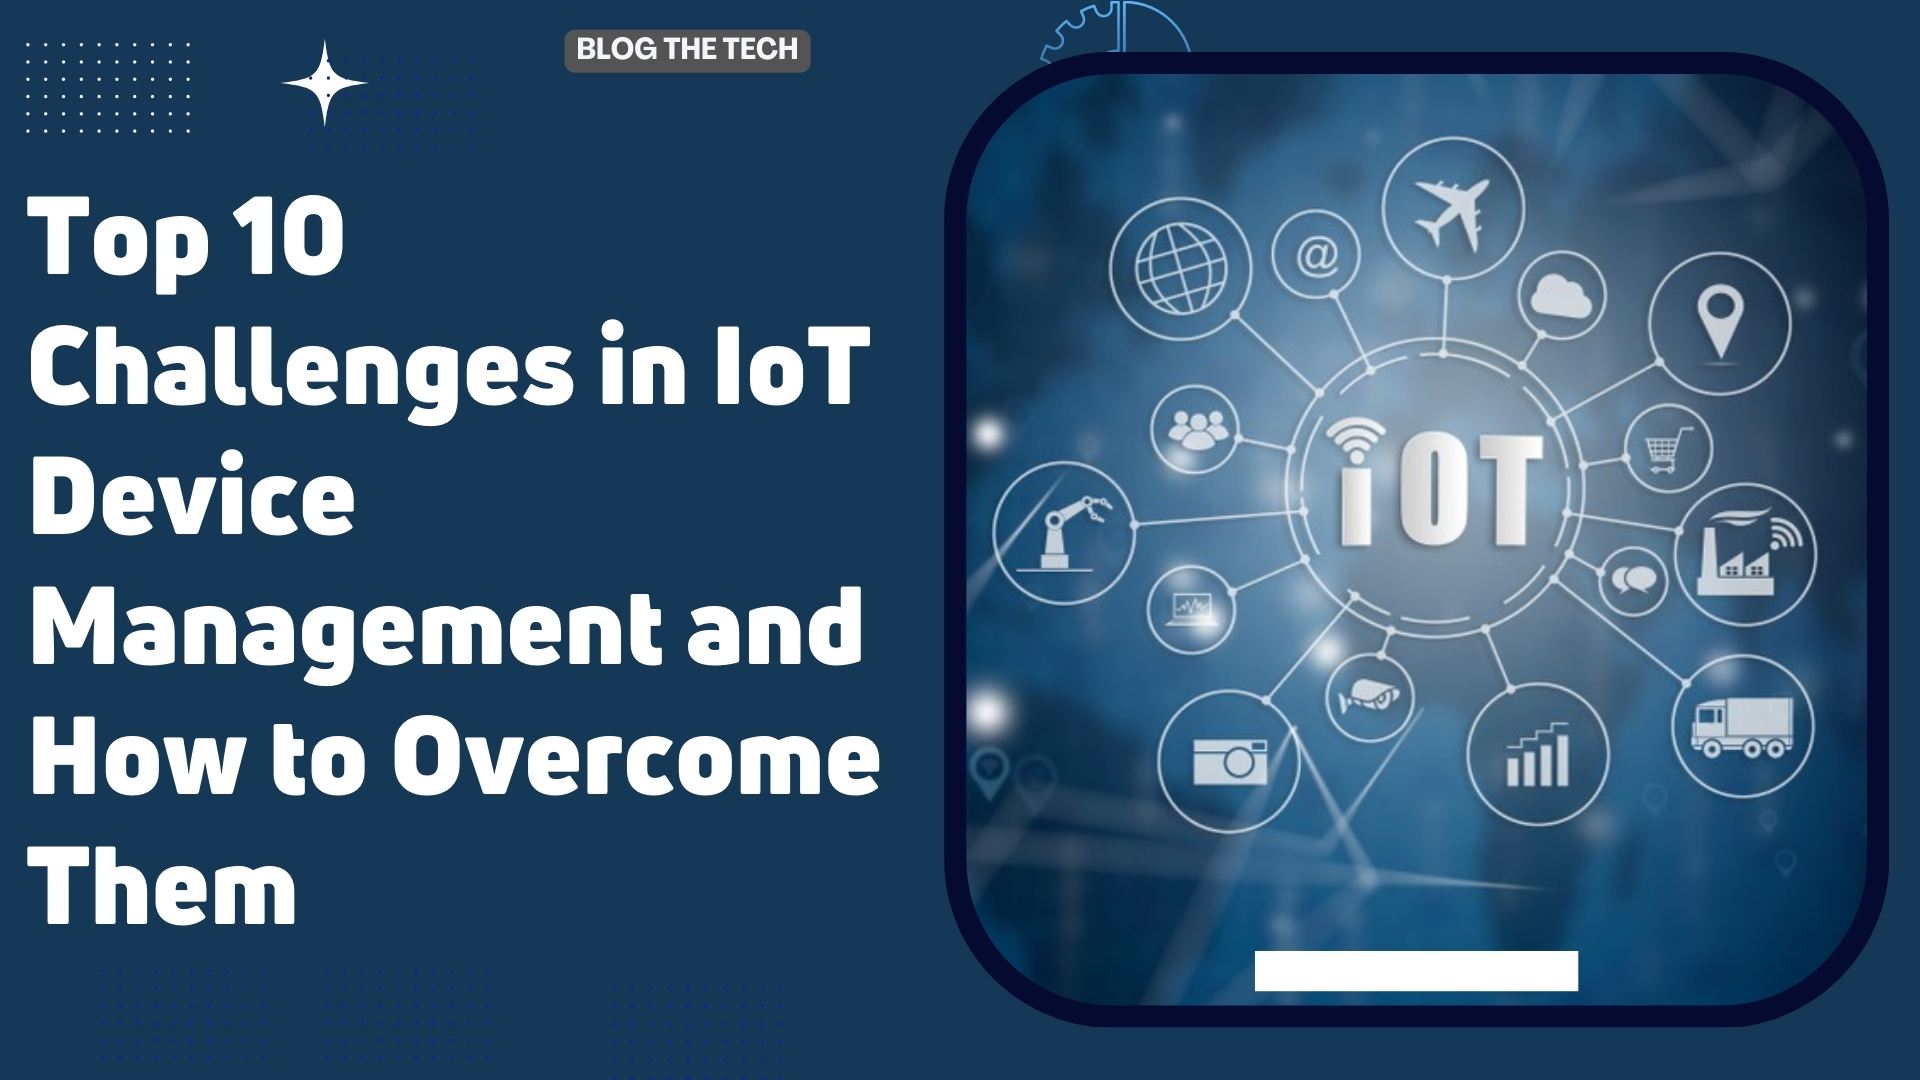 Top 10 Challenges in IoT Device Management and How to Overcome Them